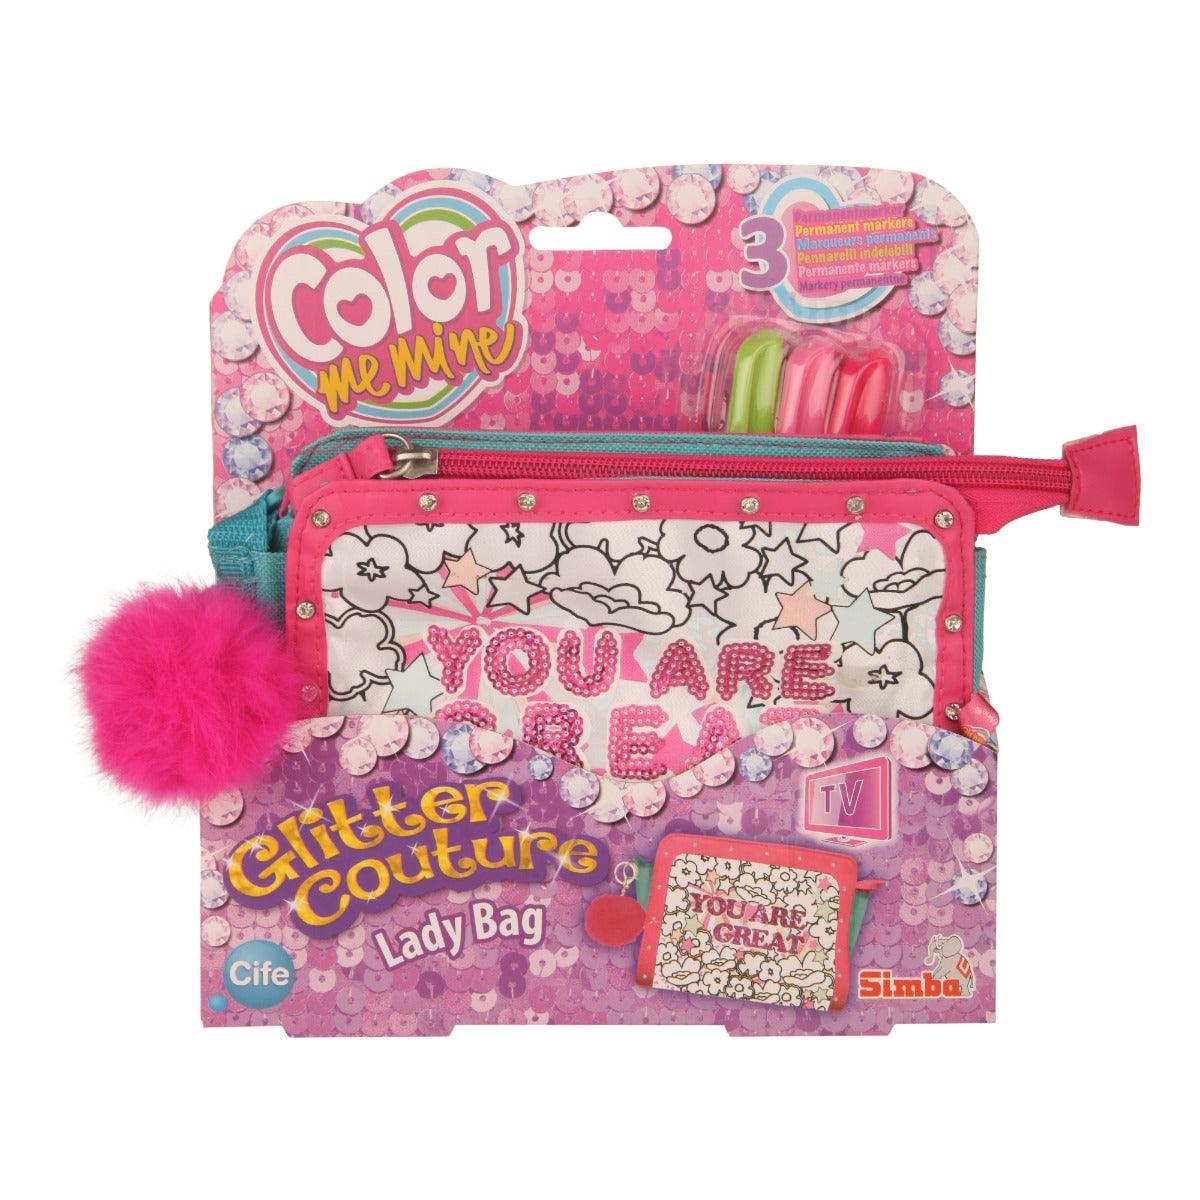 Simba Color Me Mine Glitter Couture Lady Bag